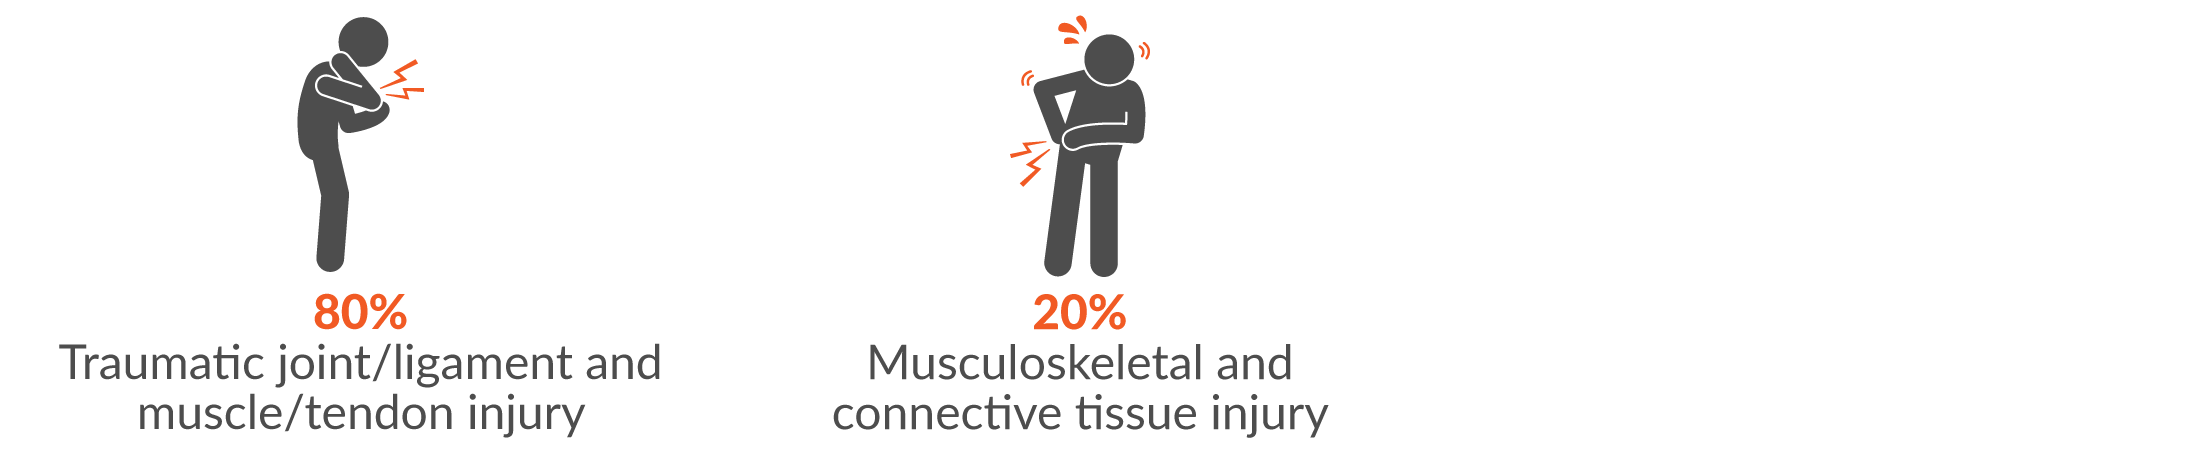 This infographic shows the main two injury groups resulting from body stressing were 80% traumatic joint/ligament and muscle/tendon injury; and 20% musculoskeletal and connective tissue injury.